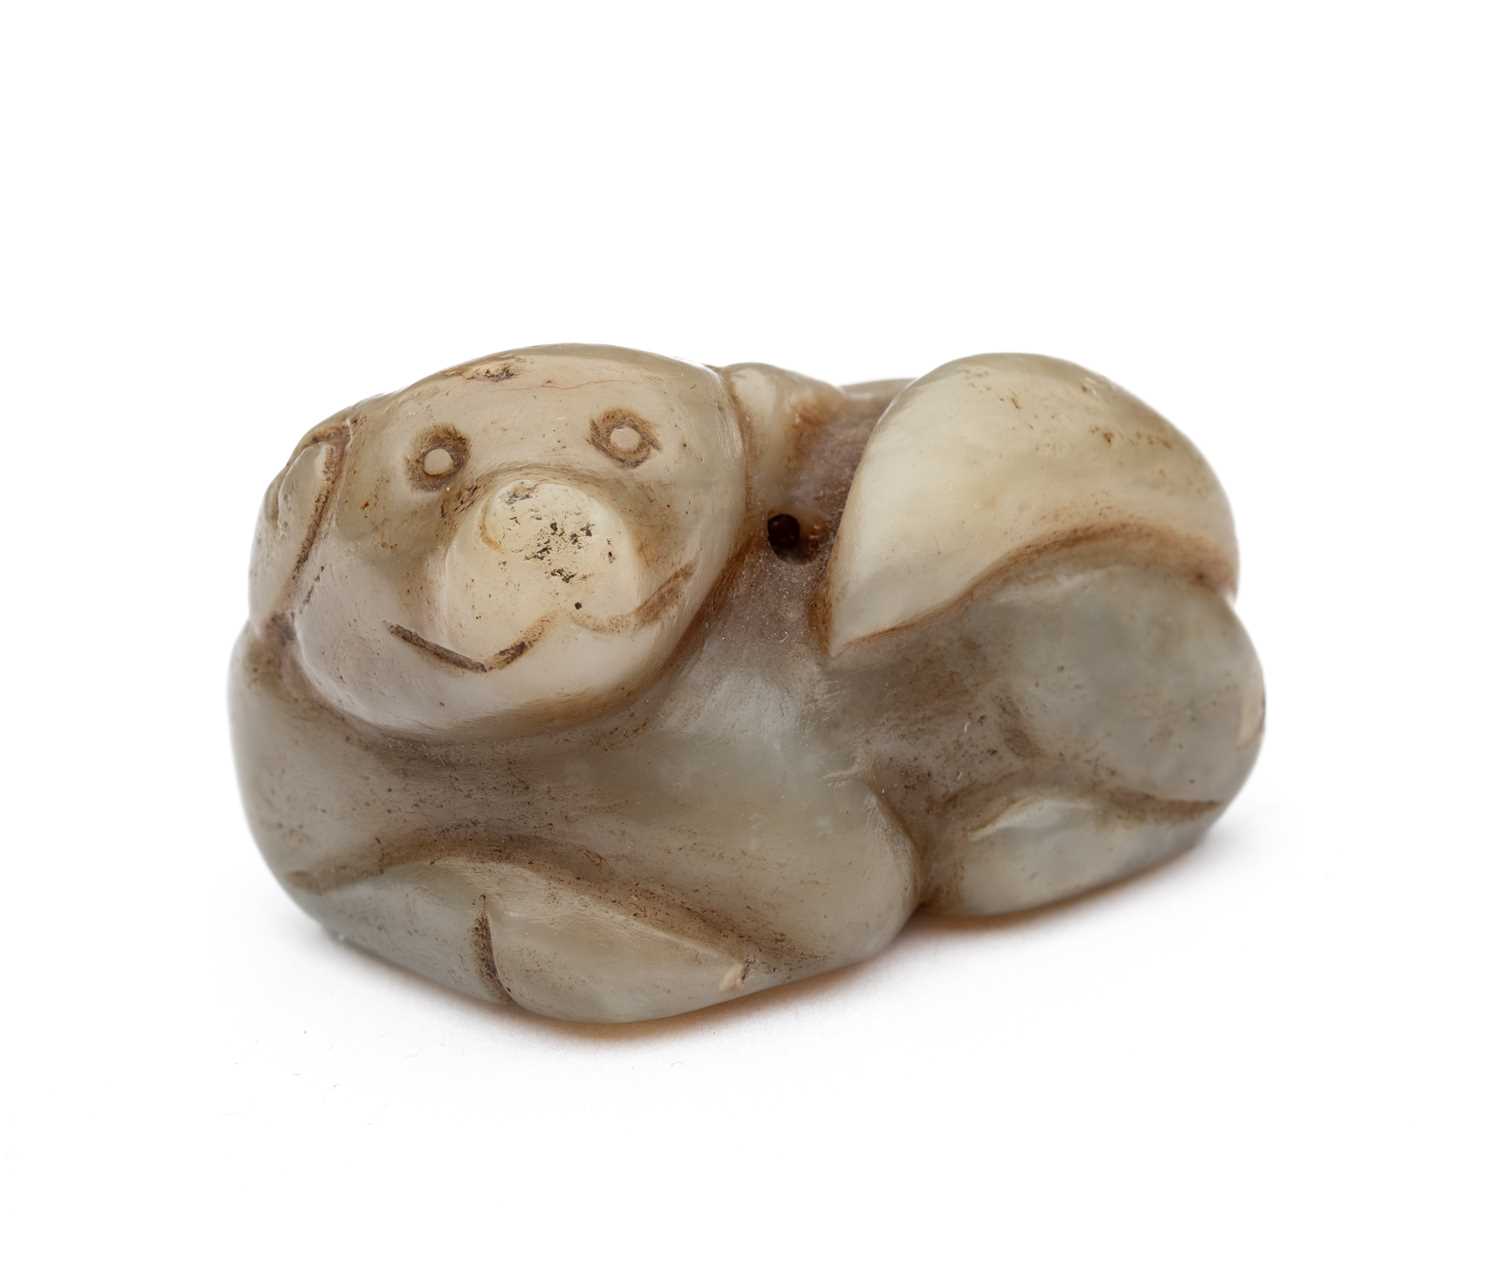 A CHINESE CELADON JADE DOG, QING DYNASTY (1644-1911)